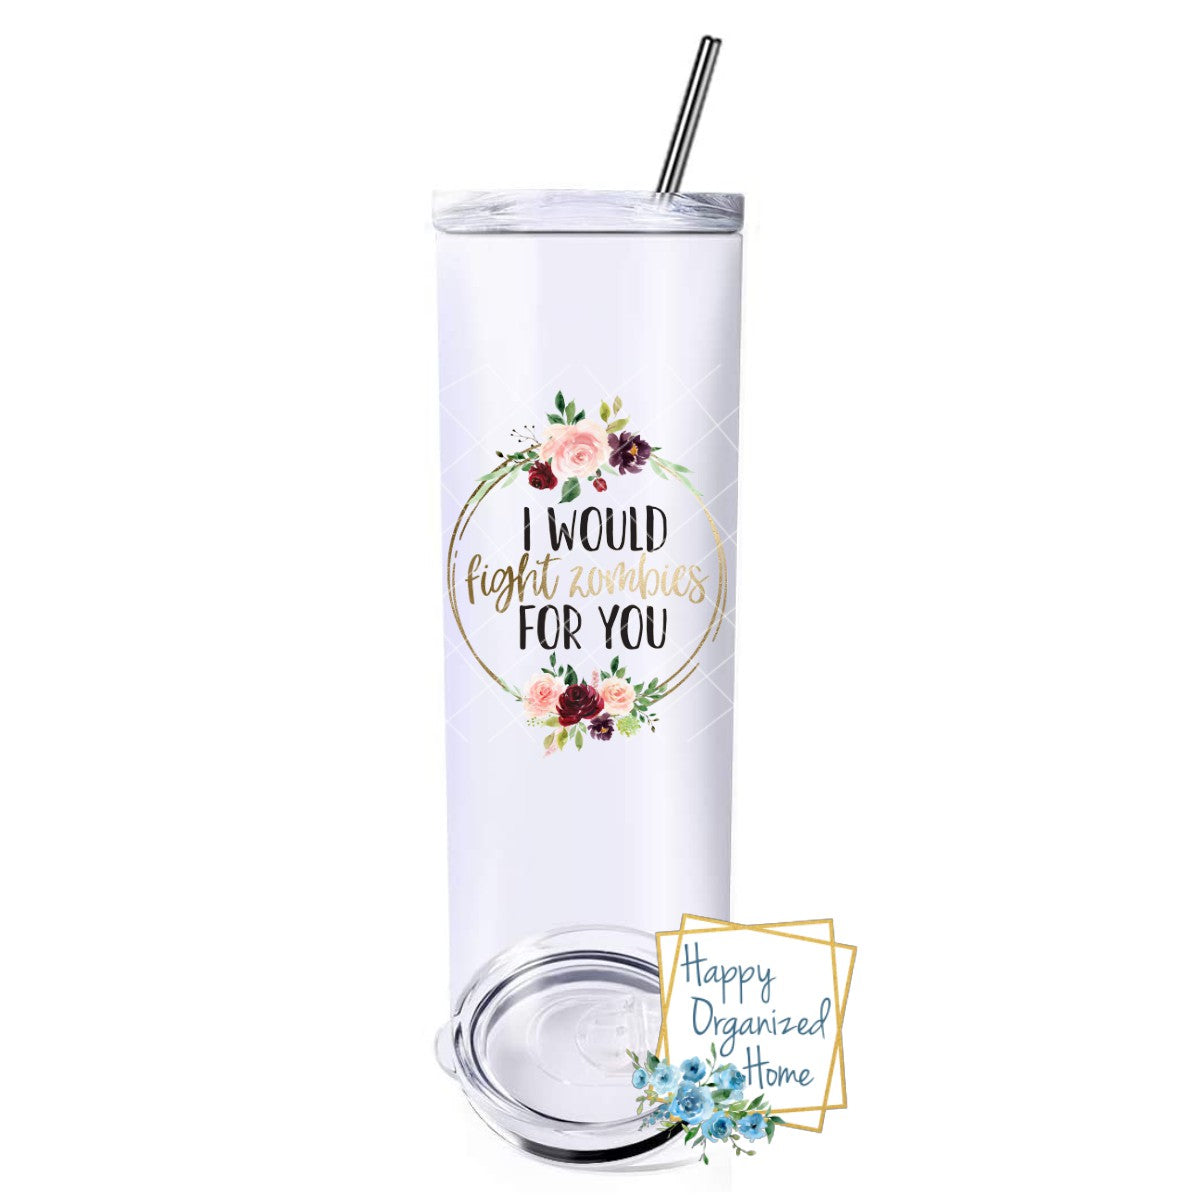 I would fight Zombies for you - Insulated tumbler with metal straw